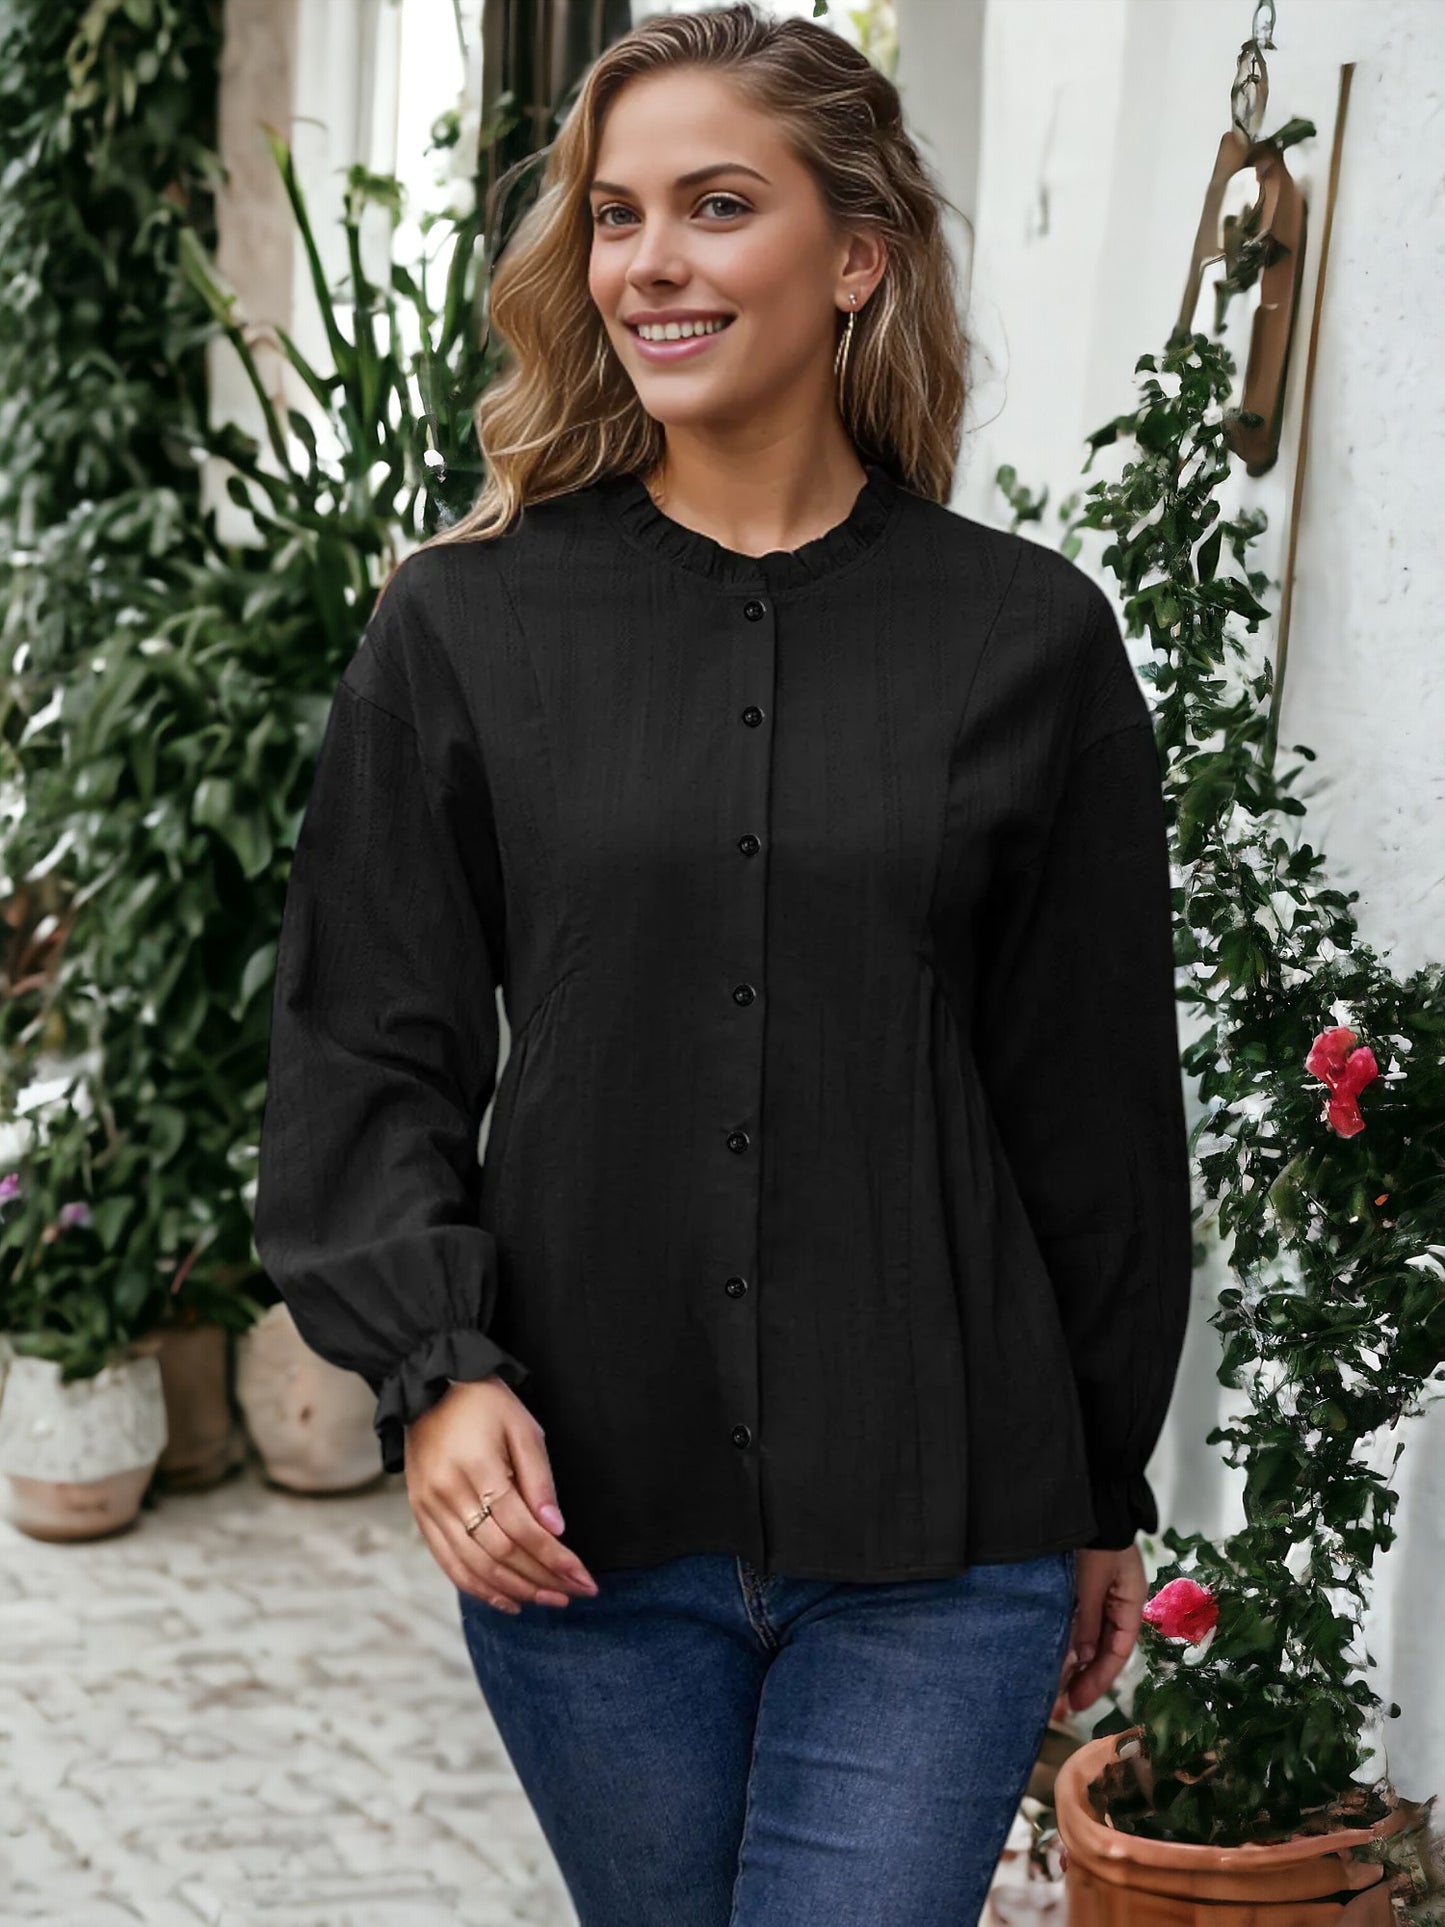 Ruffle Neck Darted Blouse